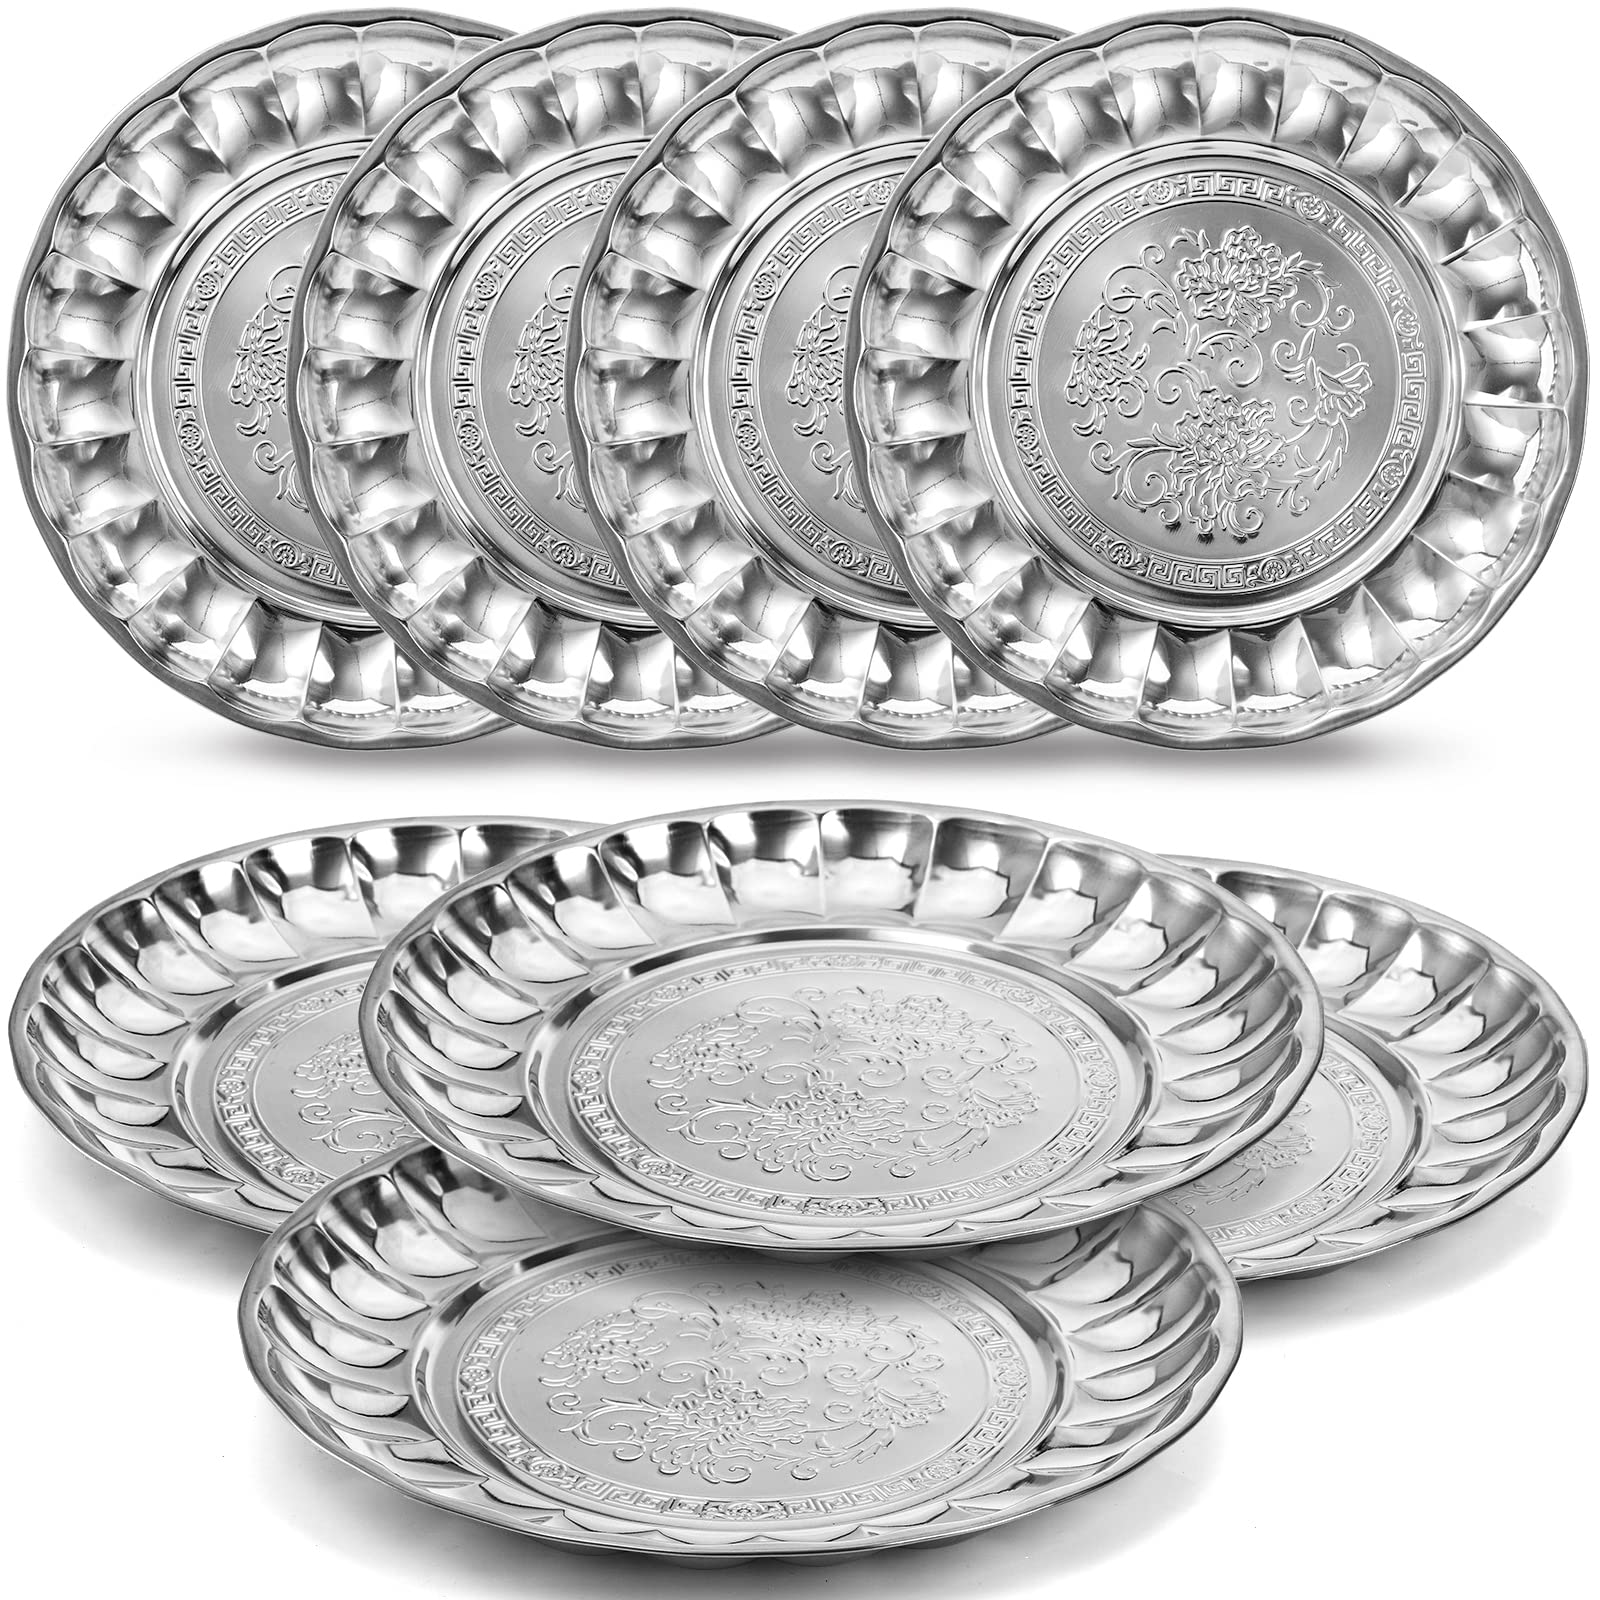 DEAYOU 8 Pack Stainless Steel Round Plates, 12" Large Dinner Plate for Eating, Kids, Stainless Steel Charger Plate, Vintage Feeding Serving Camping Plate Dish for Fruit, BBQ, Flower Pattern